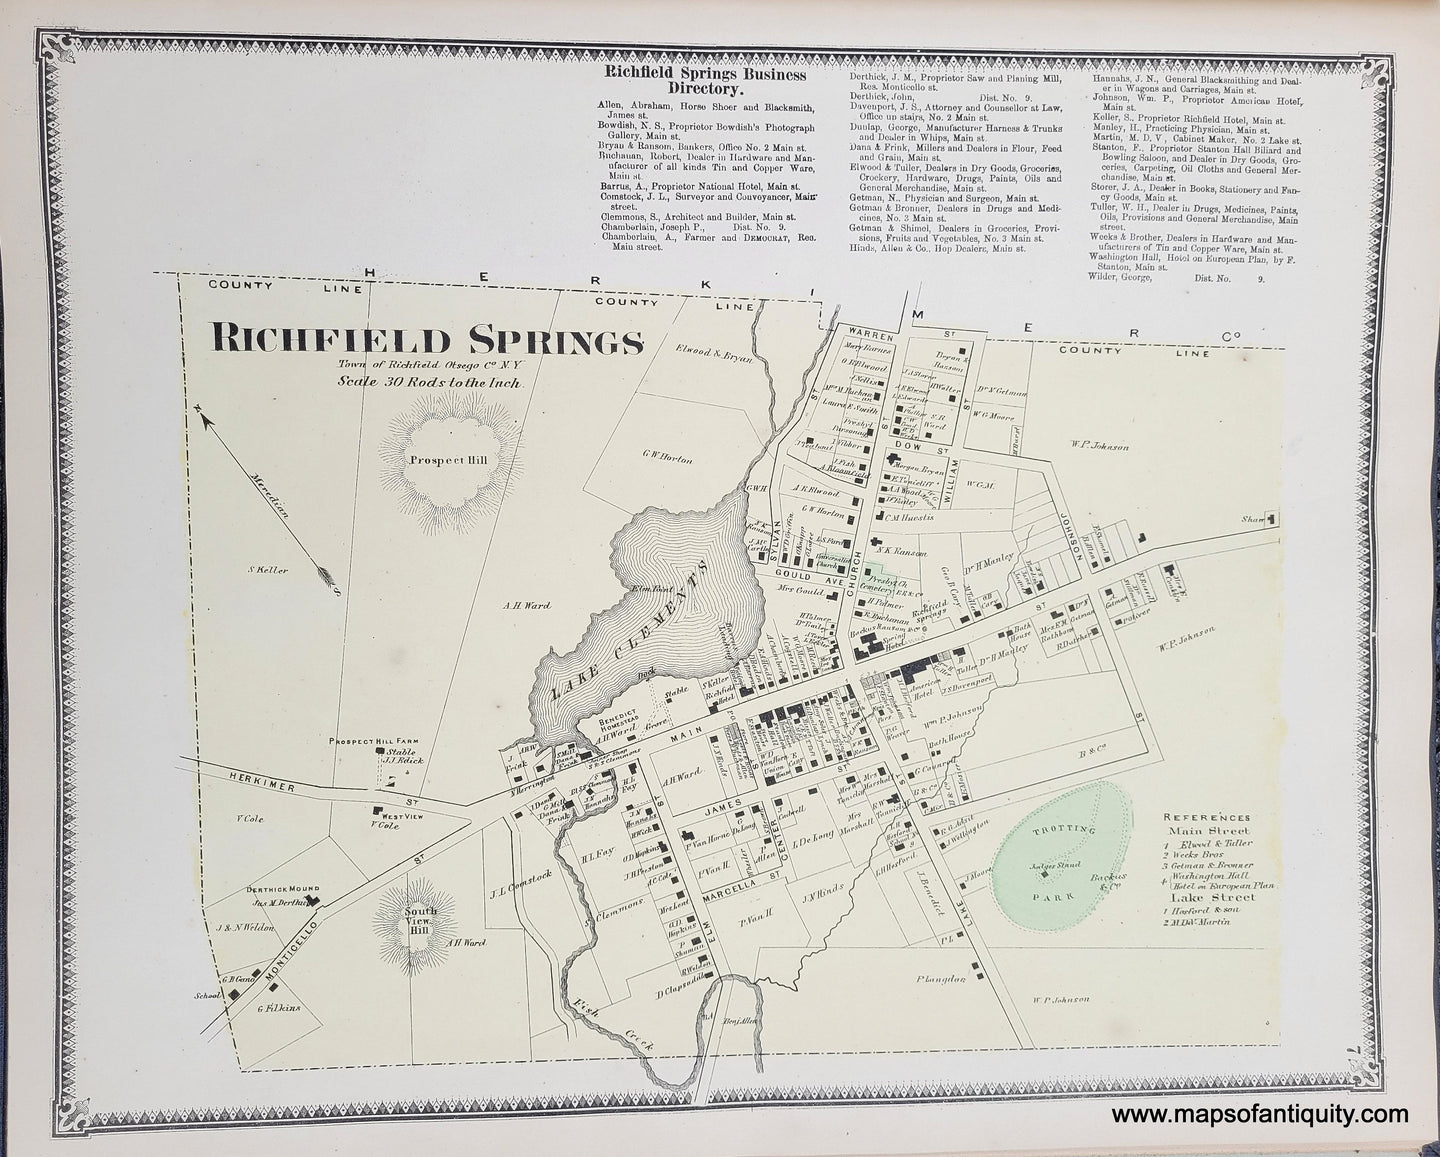 Genuine-Antique-Map-Richfield-Springs-Town-of-Richfield-Otsego-Co-NY-1868-Beers-Ellis-&-Soule-Maps-Of-Antiquity